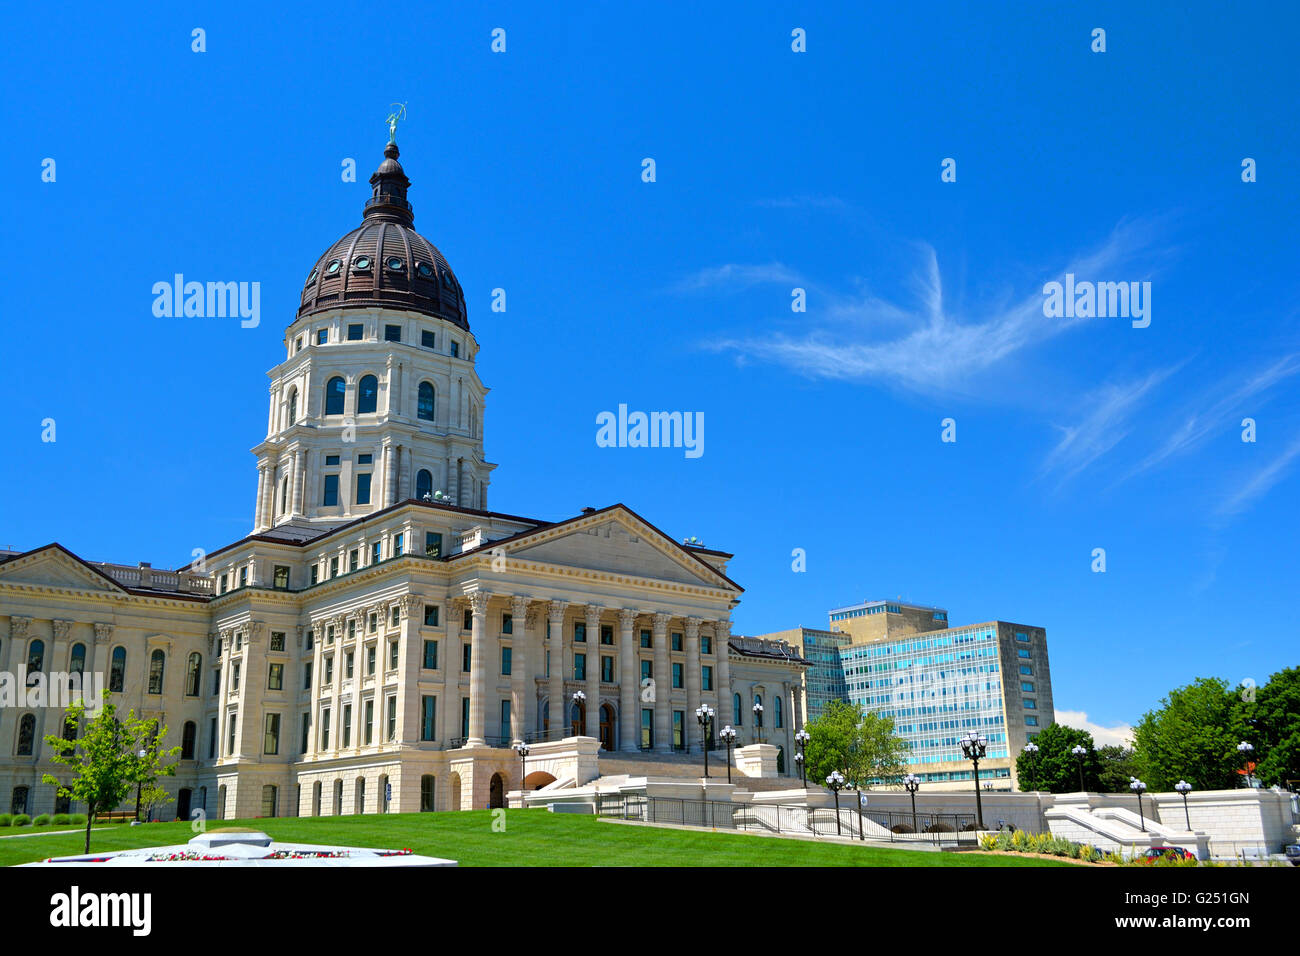 Kansas State Capitol Building on a Sunny Day Stock Photo